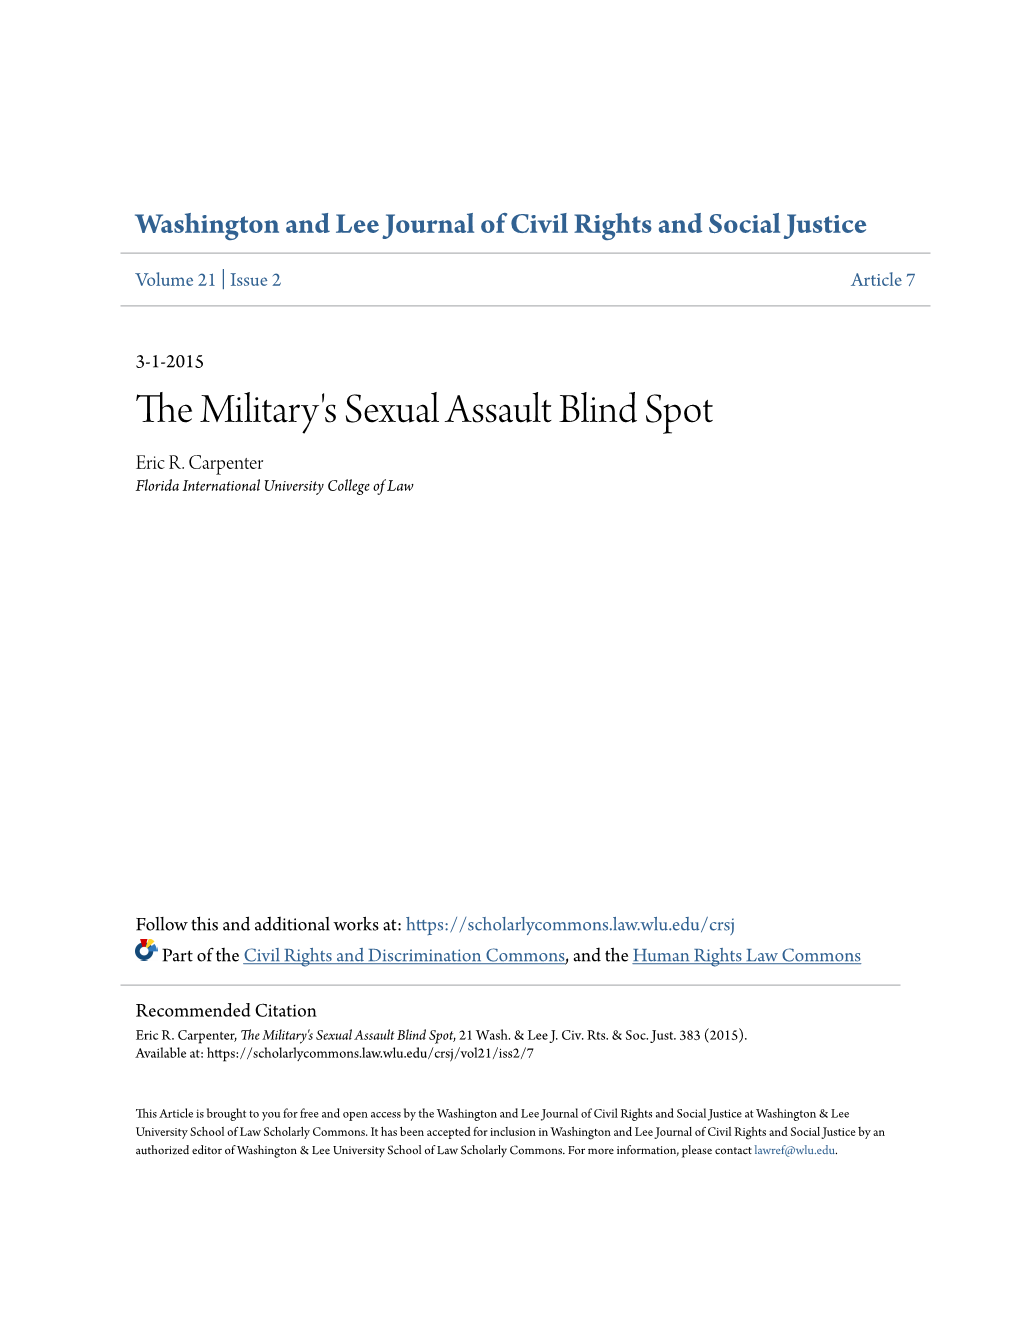 The Military's Sexual Assault Blind Spot, 21 Wash